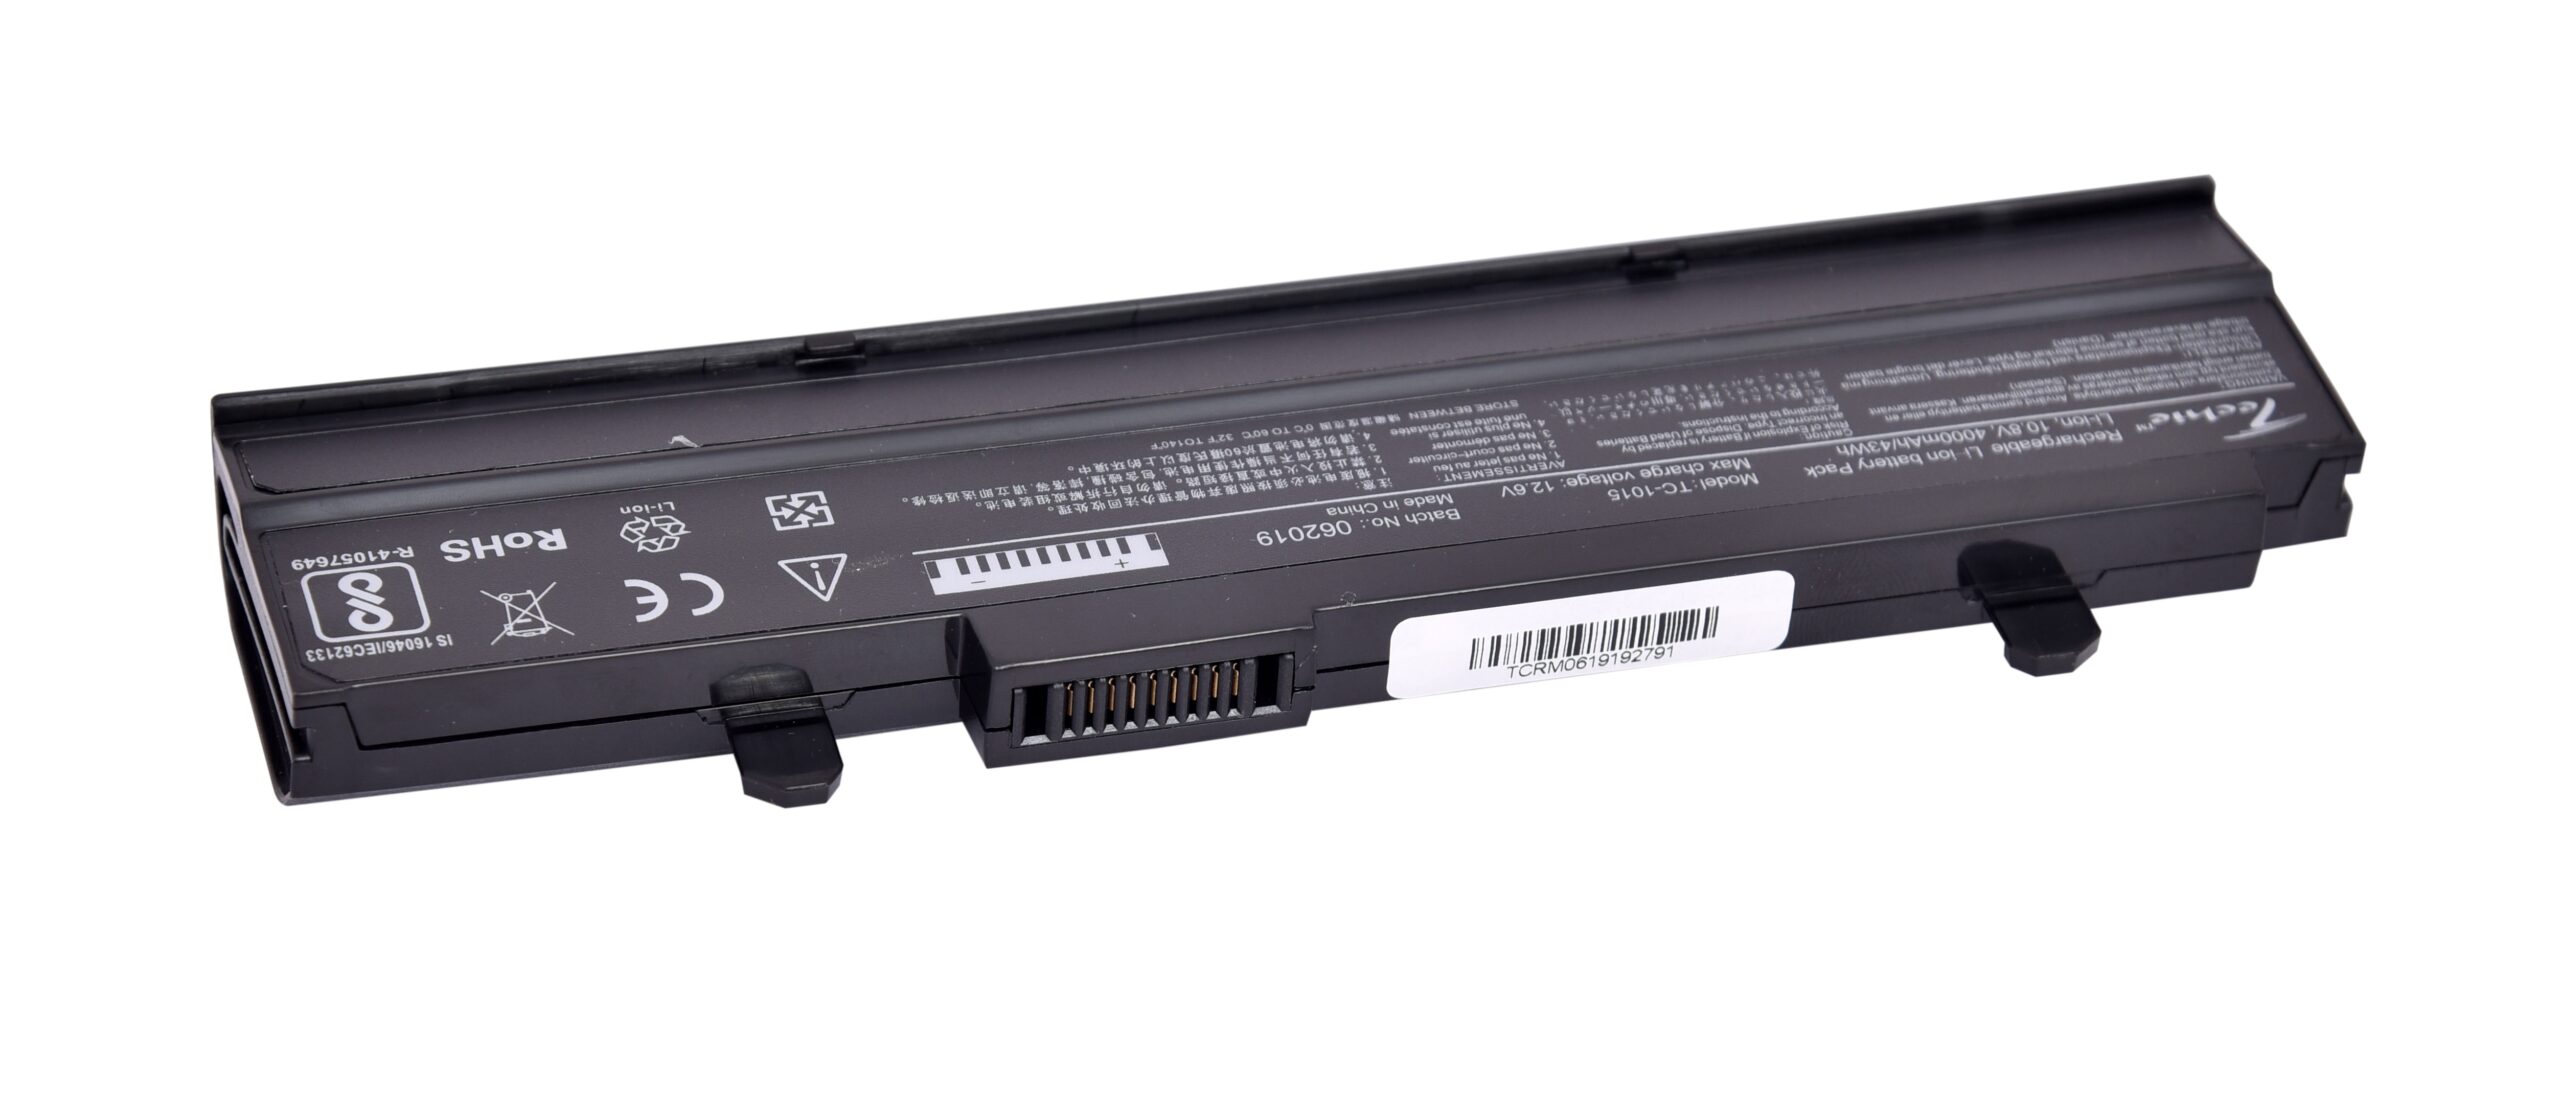 Techie Compatible Battery for Asus 1015 - A31-1015, Eee PC 1015, Eee PC 1215 Series Laptops (4000mAh, 6-Cell)